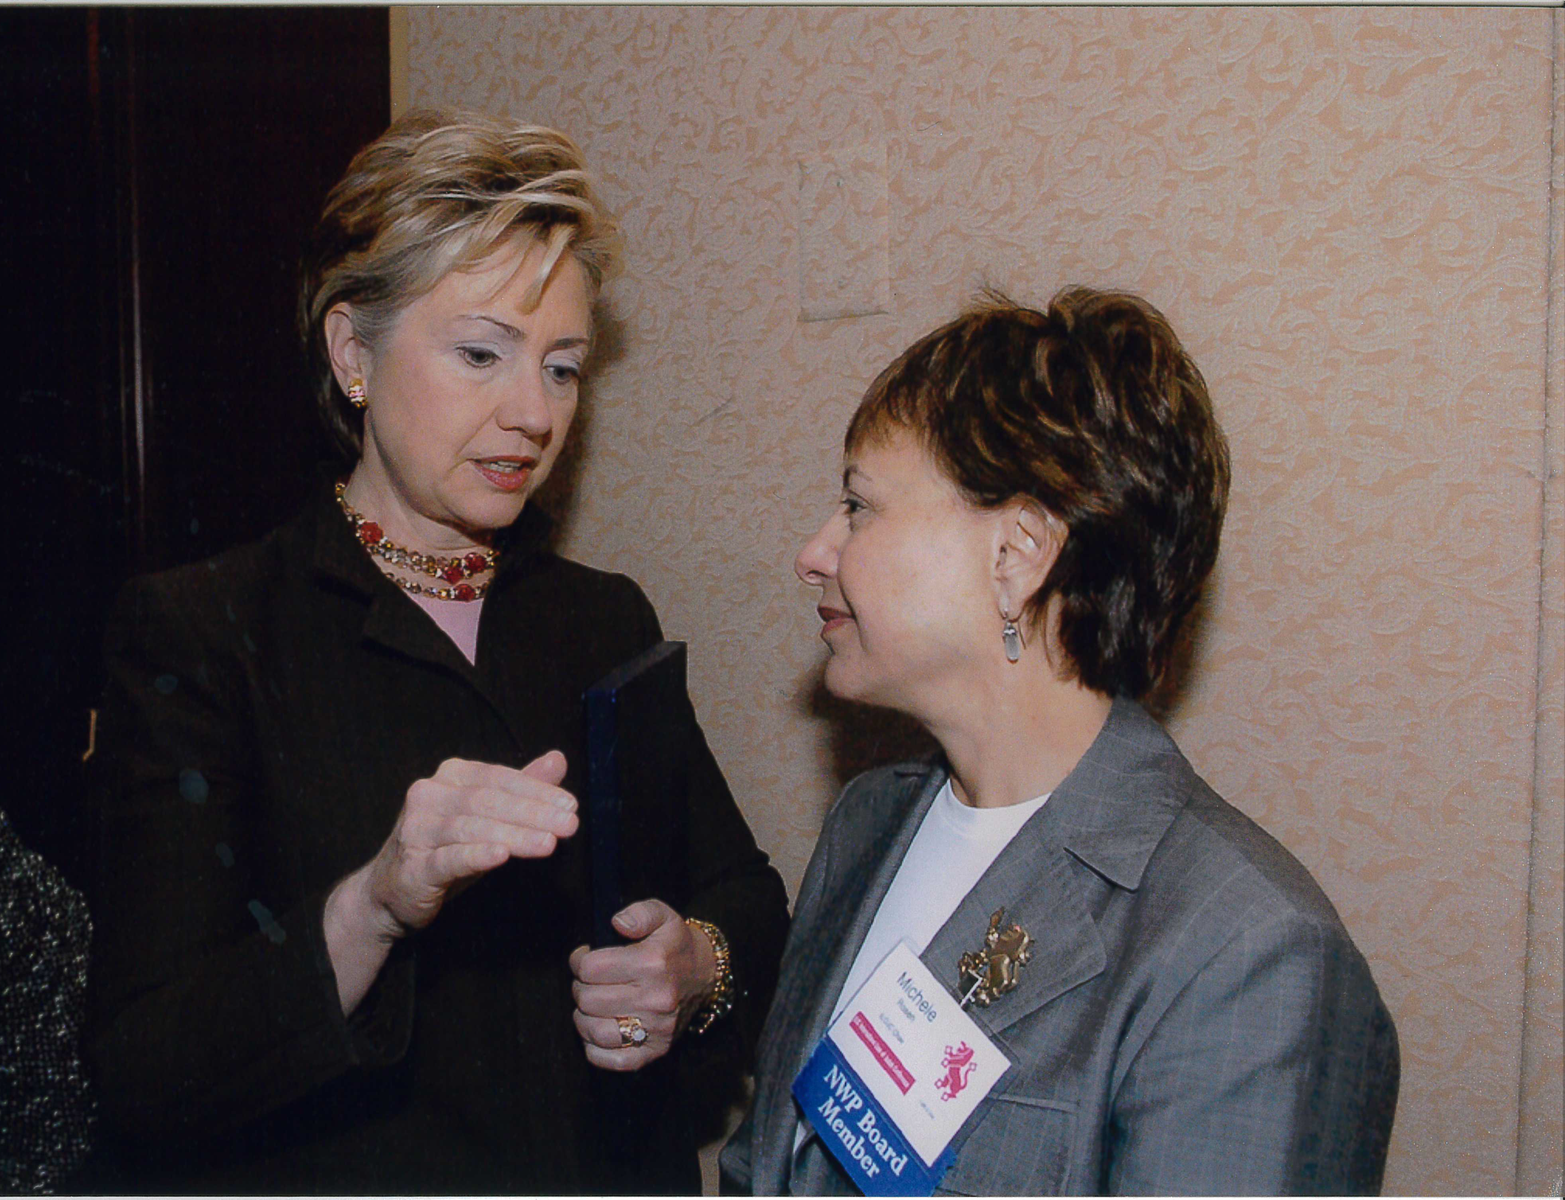 Hilary Clinton and Michele Rosen.